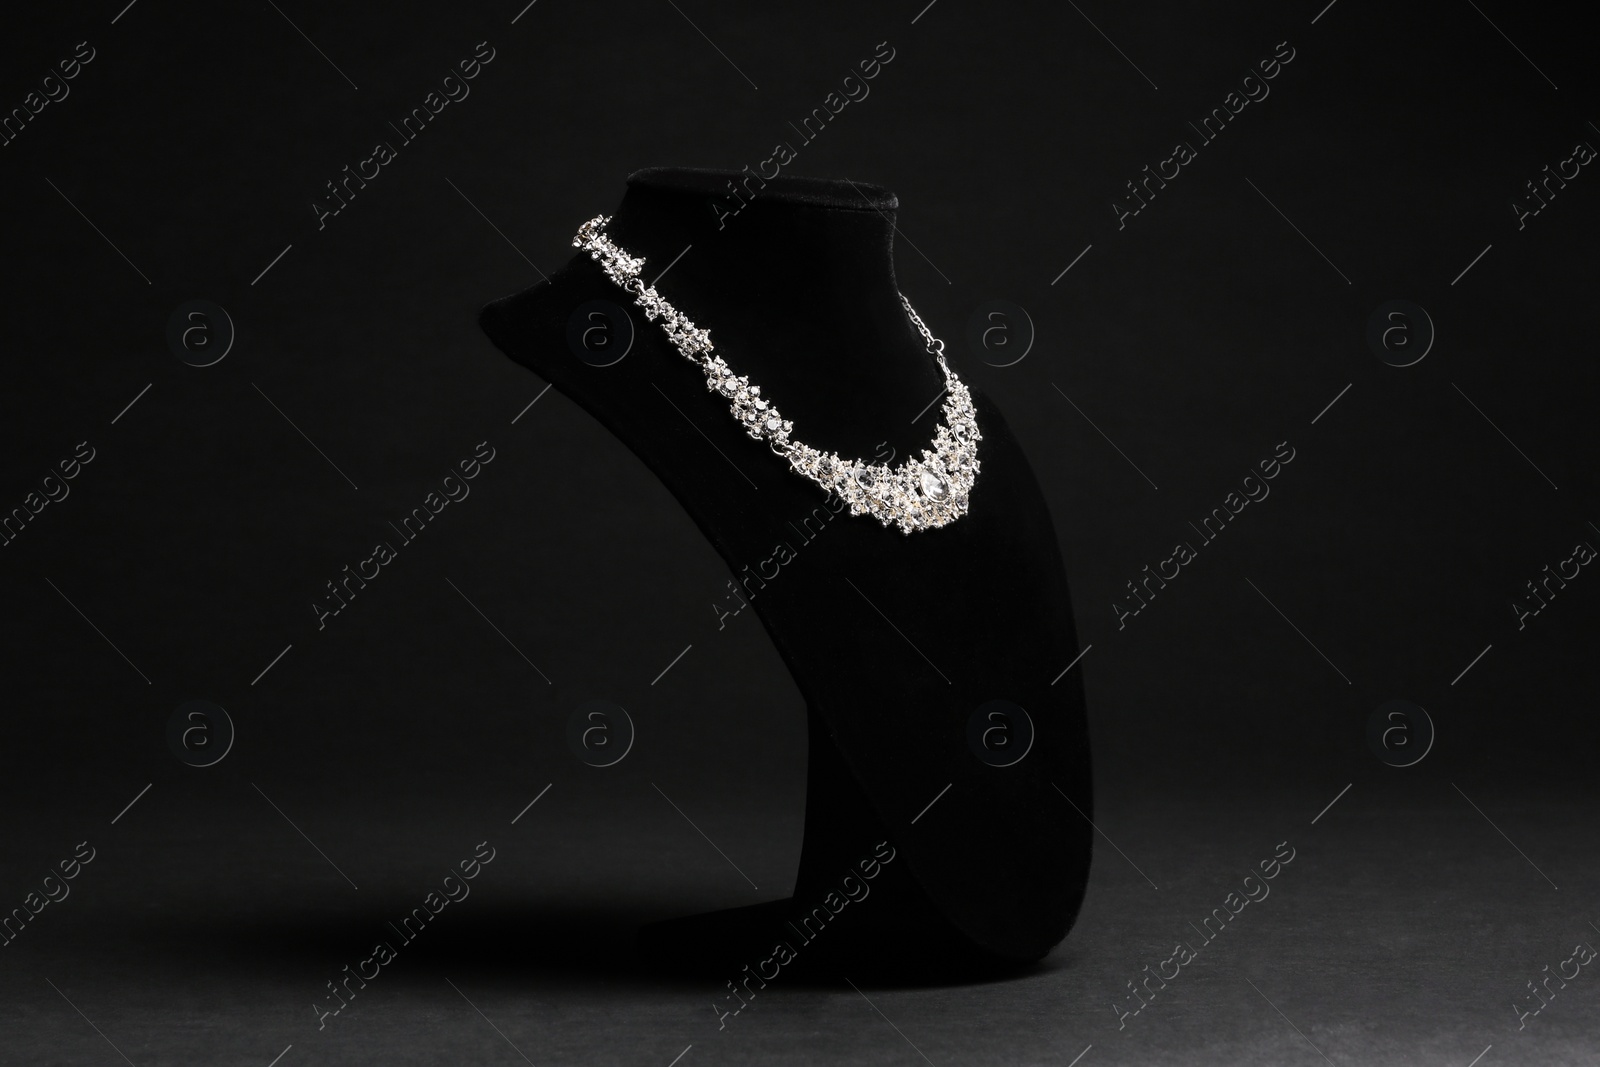 Photo of Elegant necklace on stand against black background. Luxury jewelry